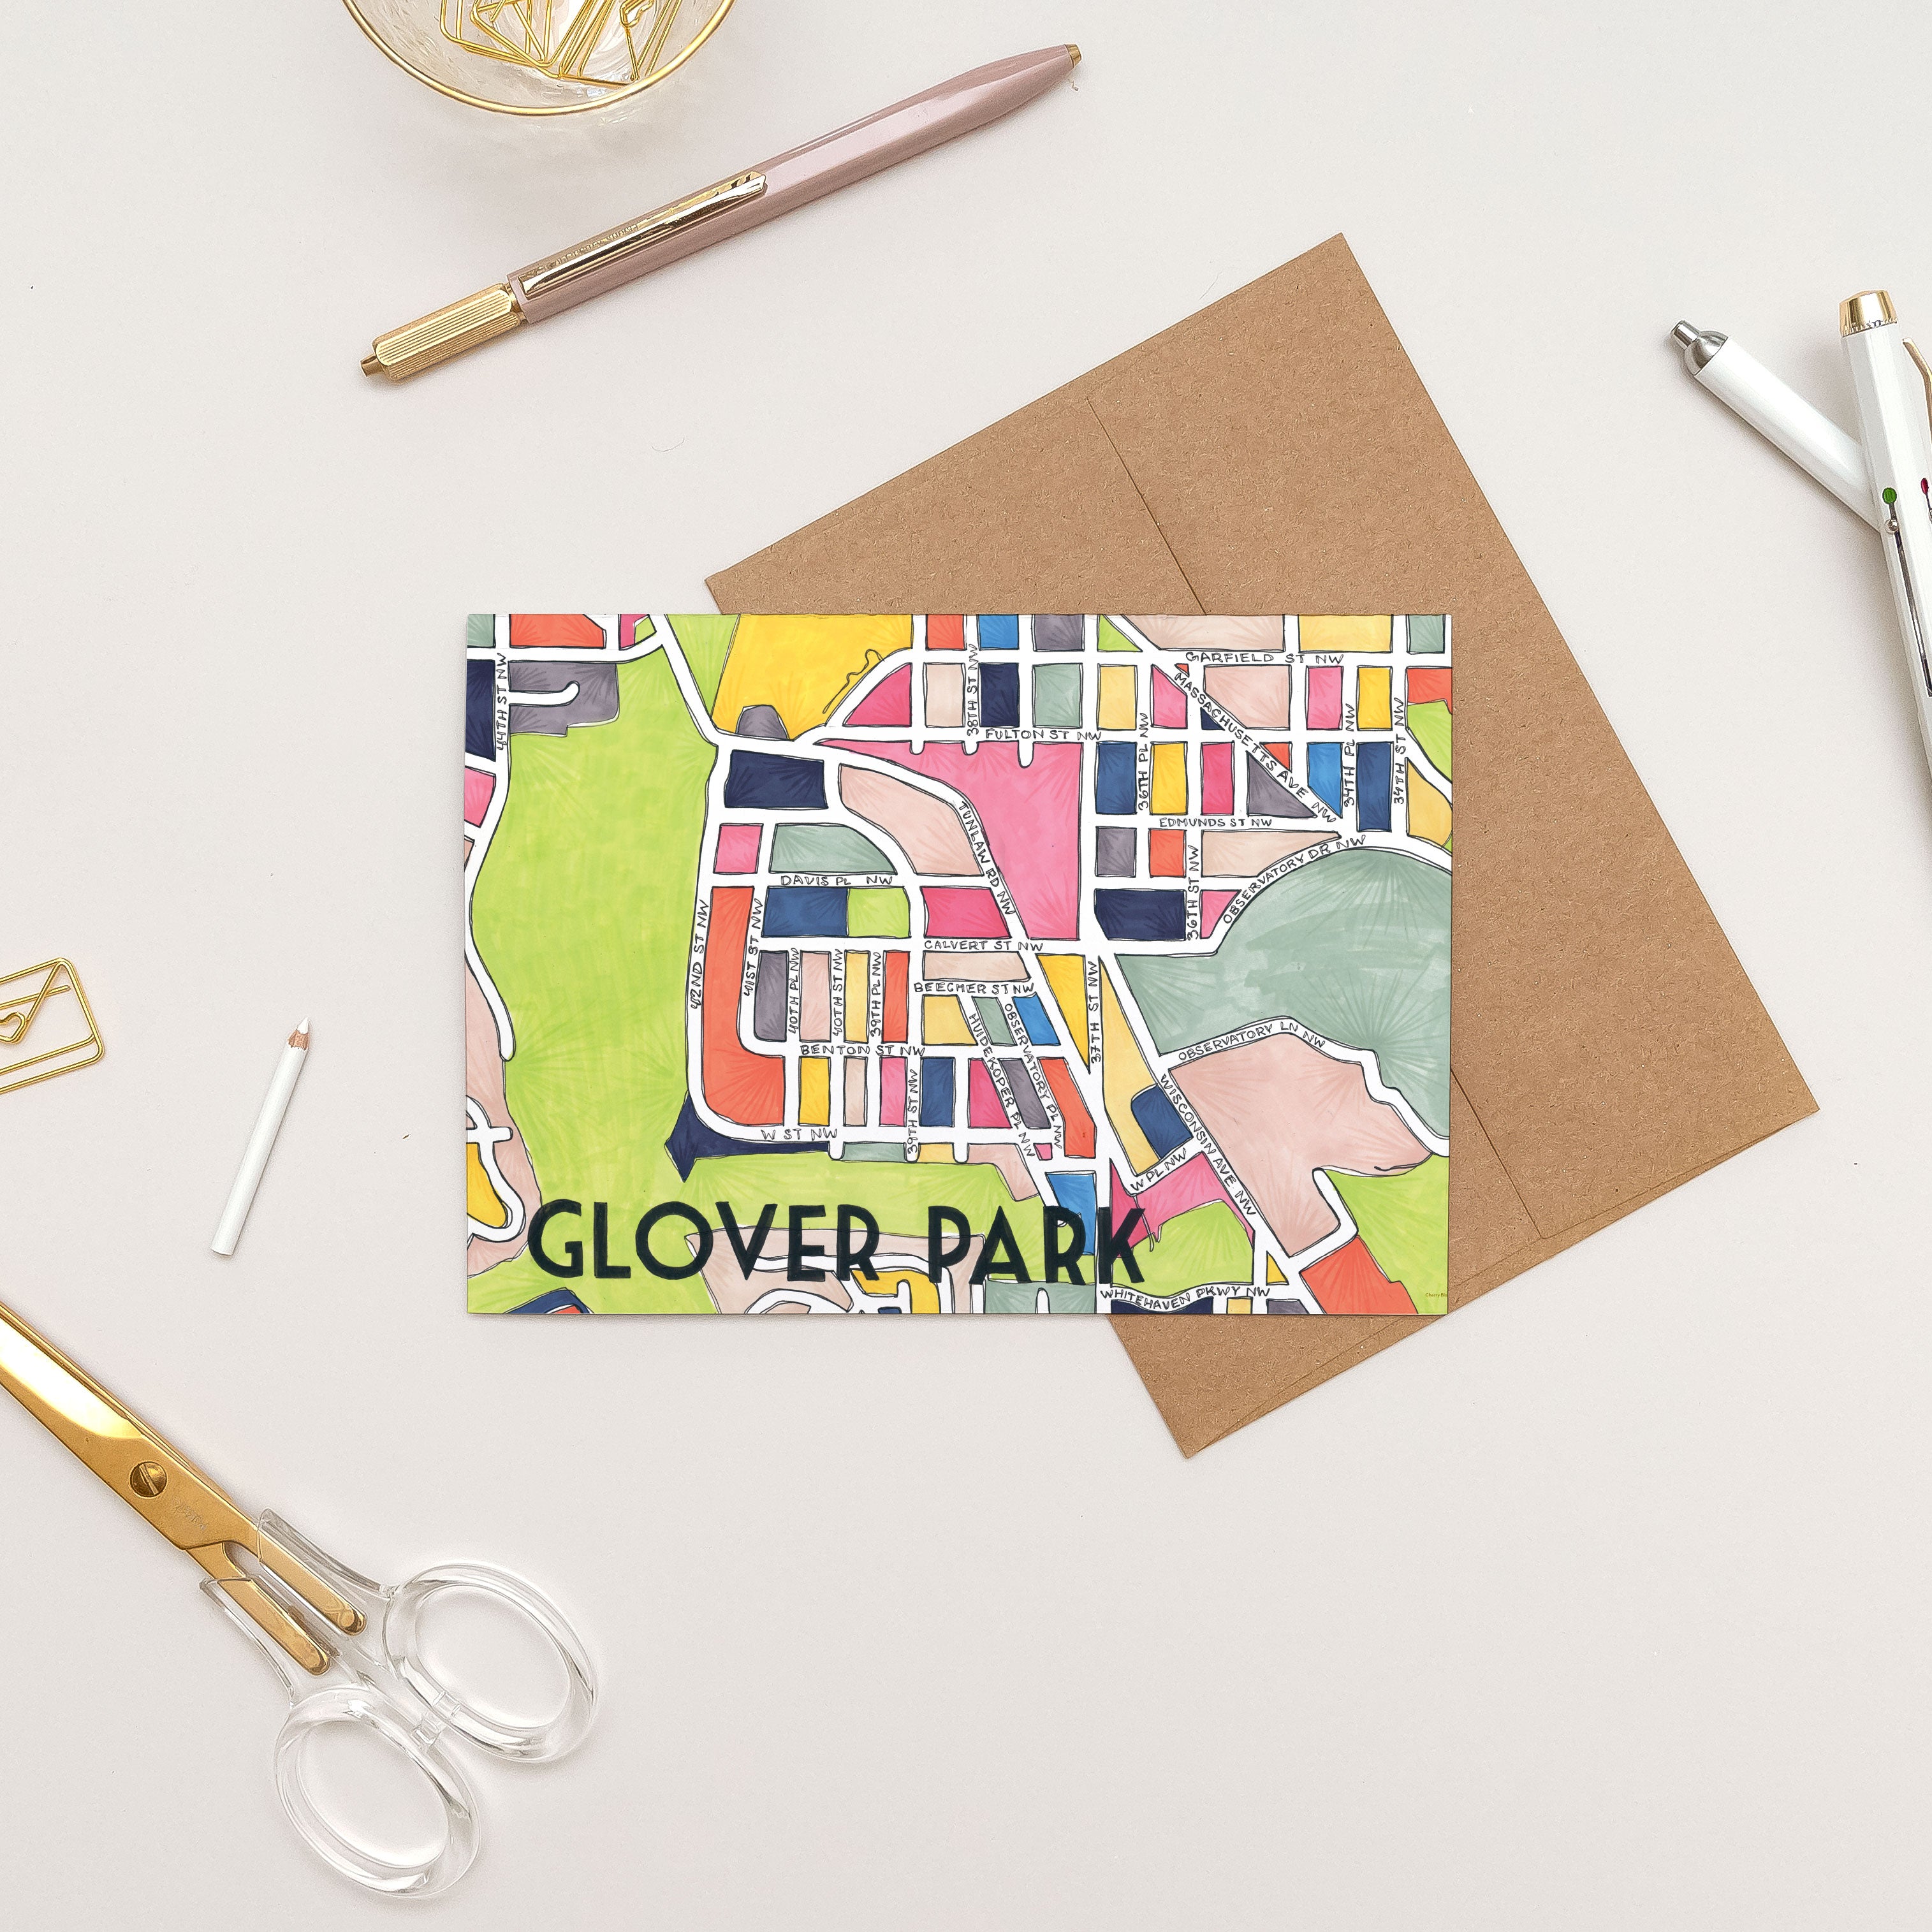 Glover Park Greeting Card